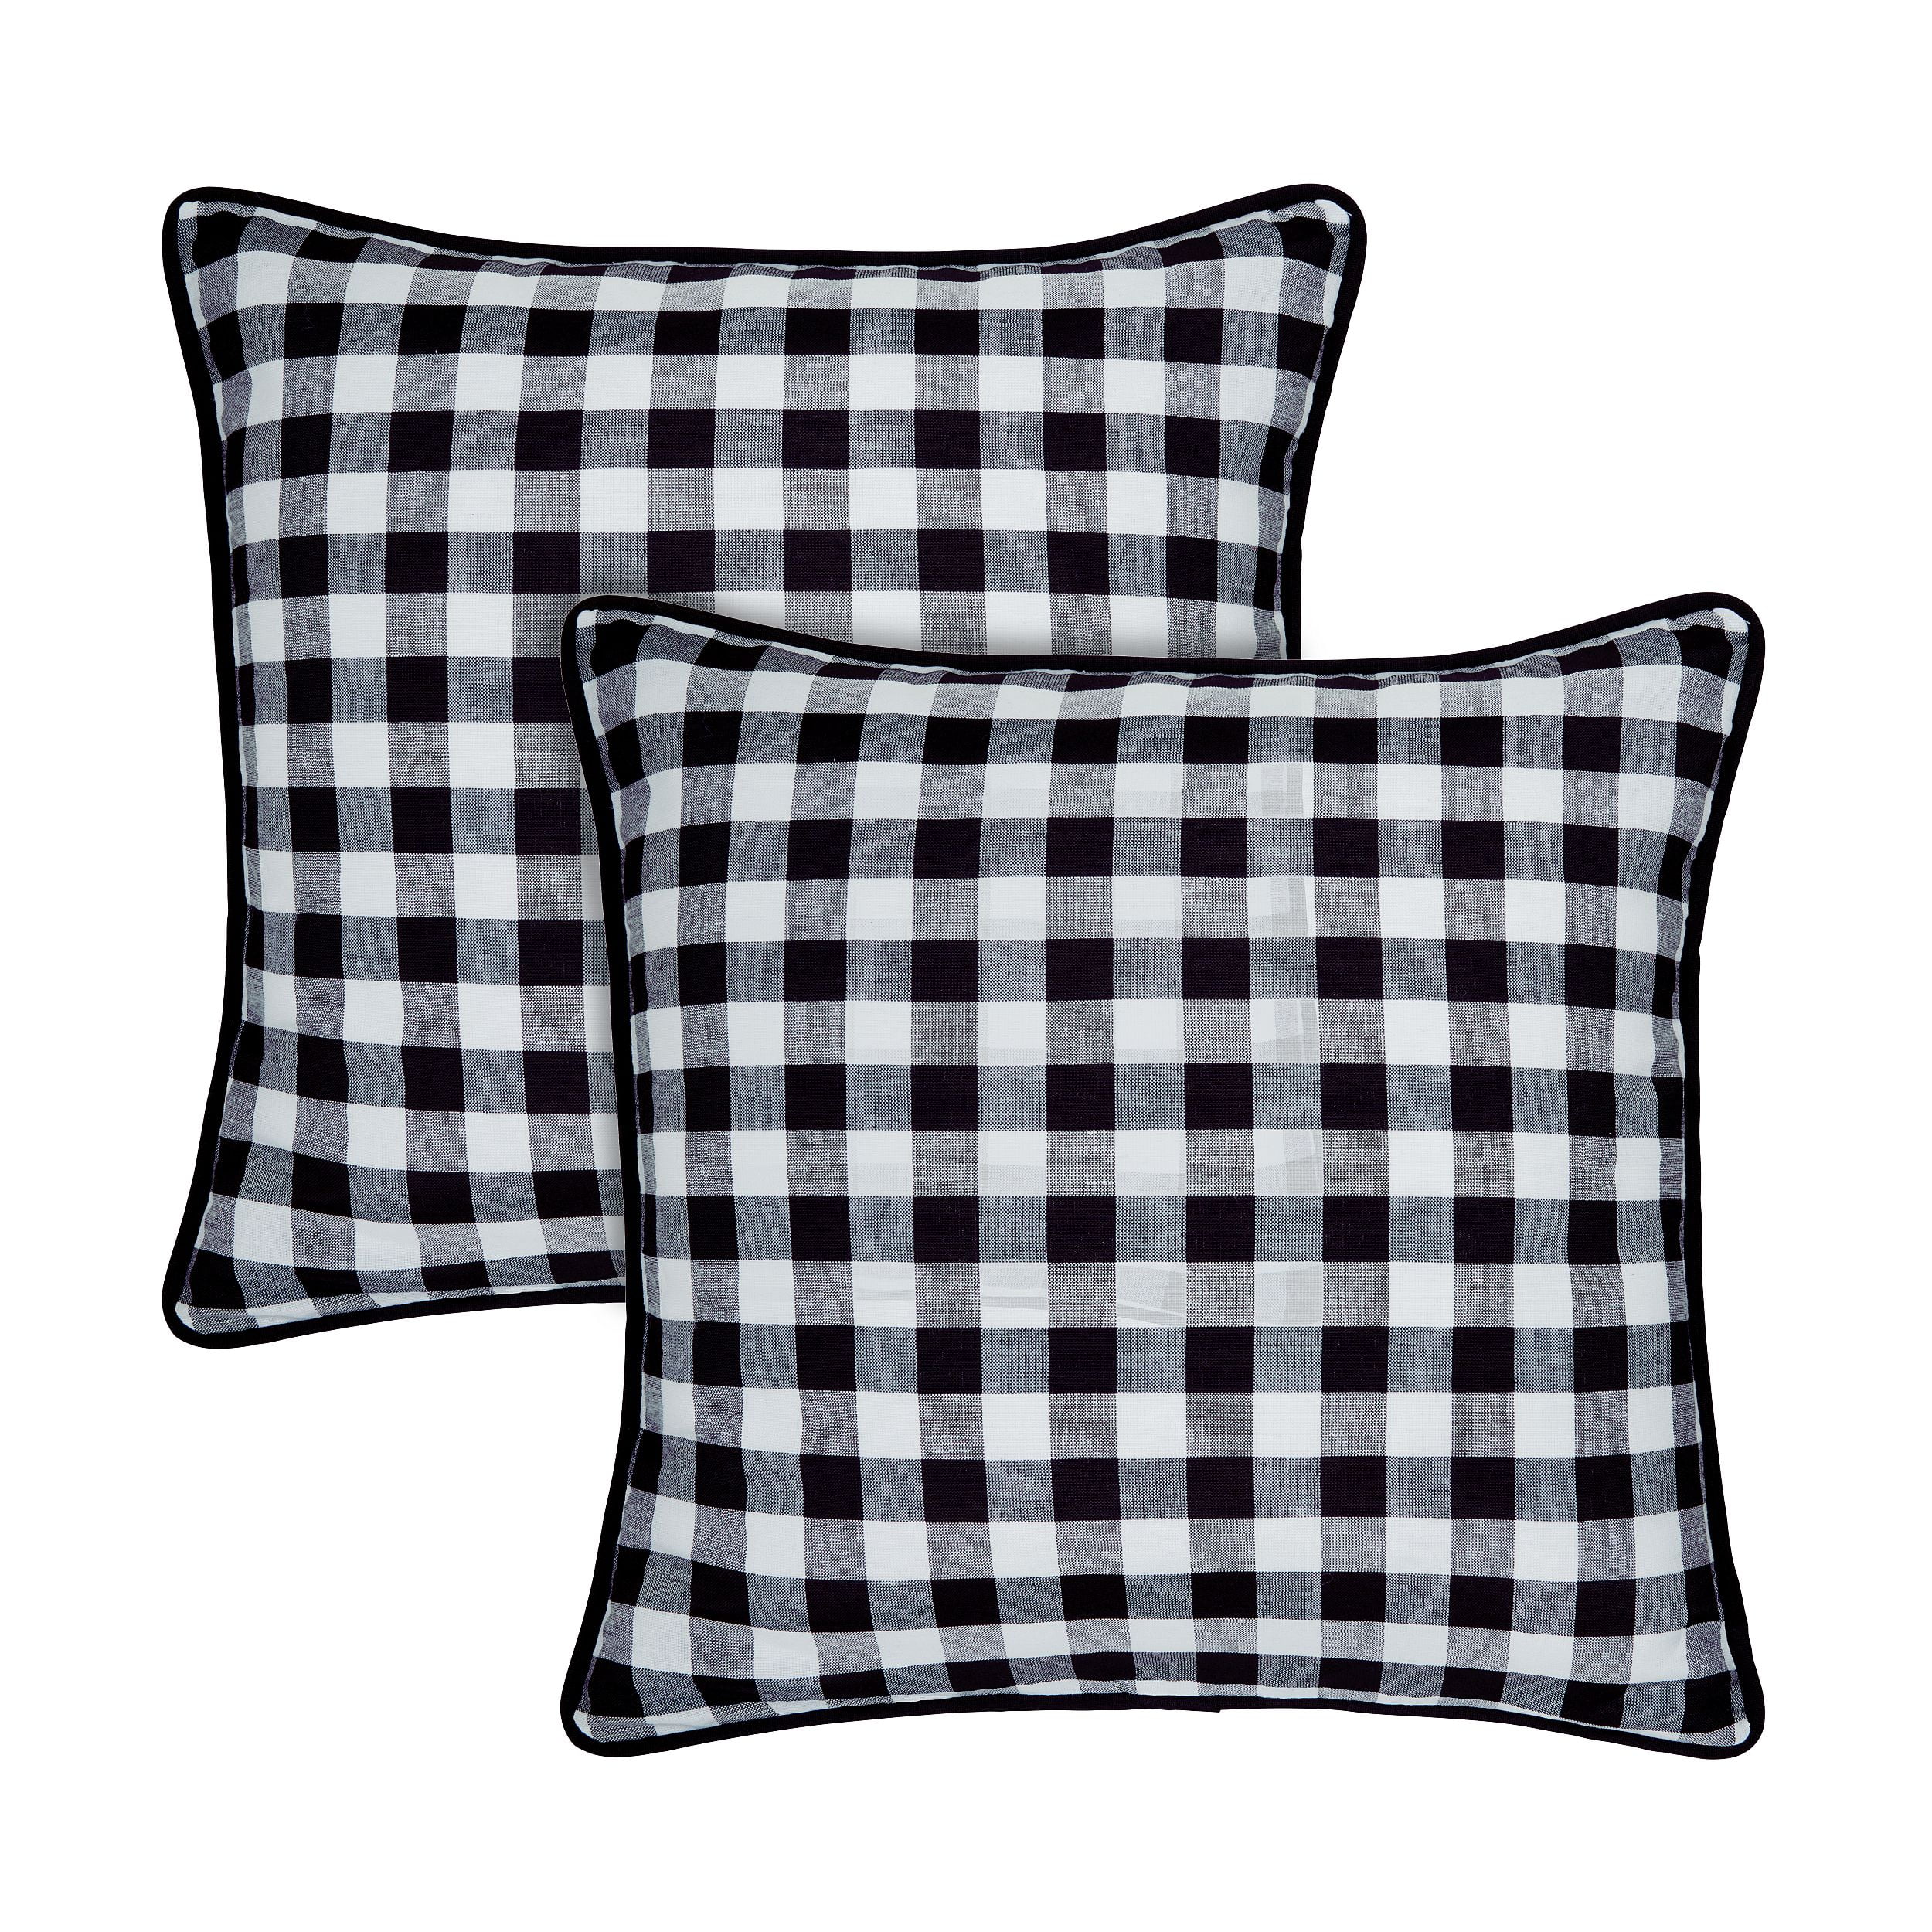 Design Imports Checkered Pillow Covers 18x18 Set of 4 - 20155331